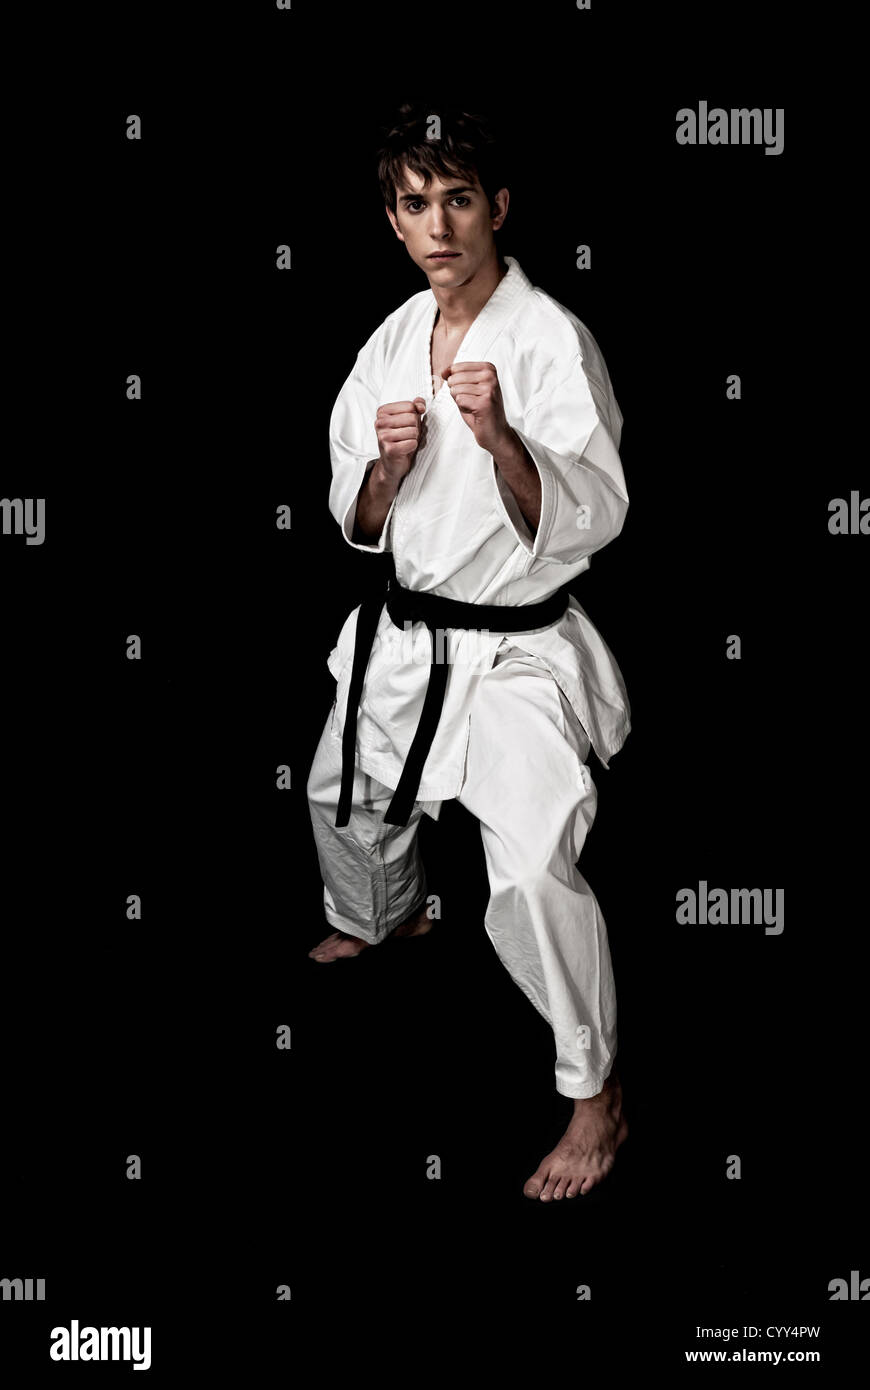 Karate male fighter young high contrast on black background Stock Photo